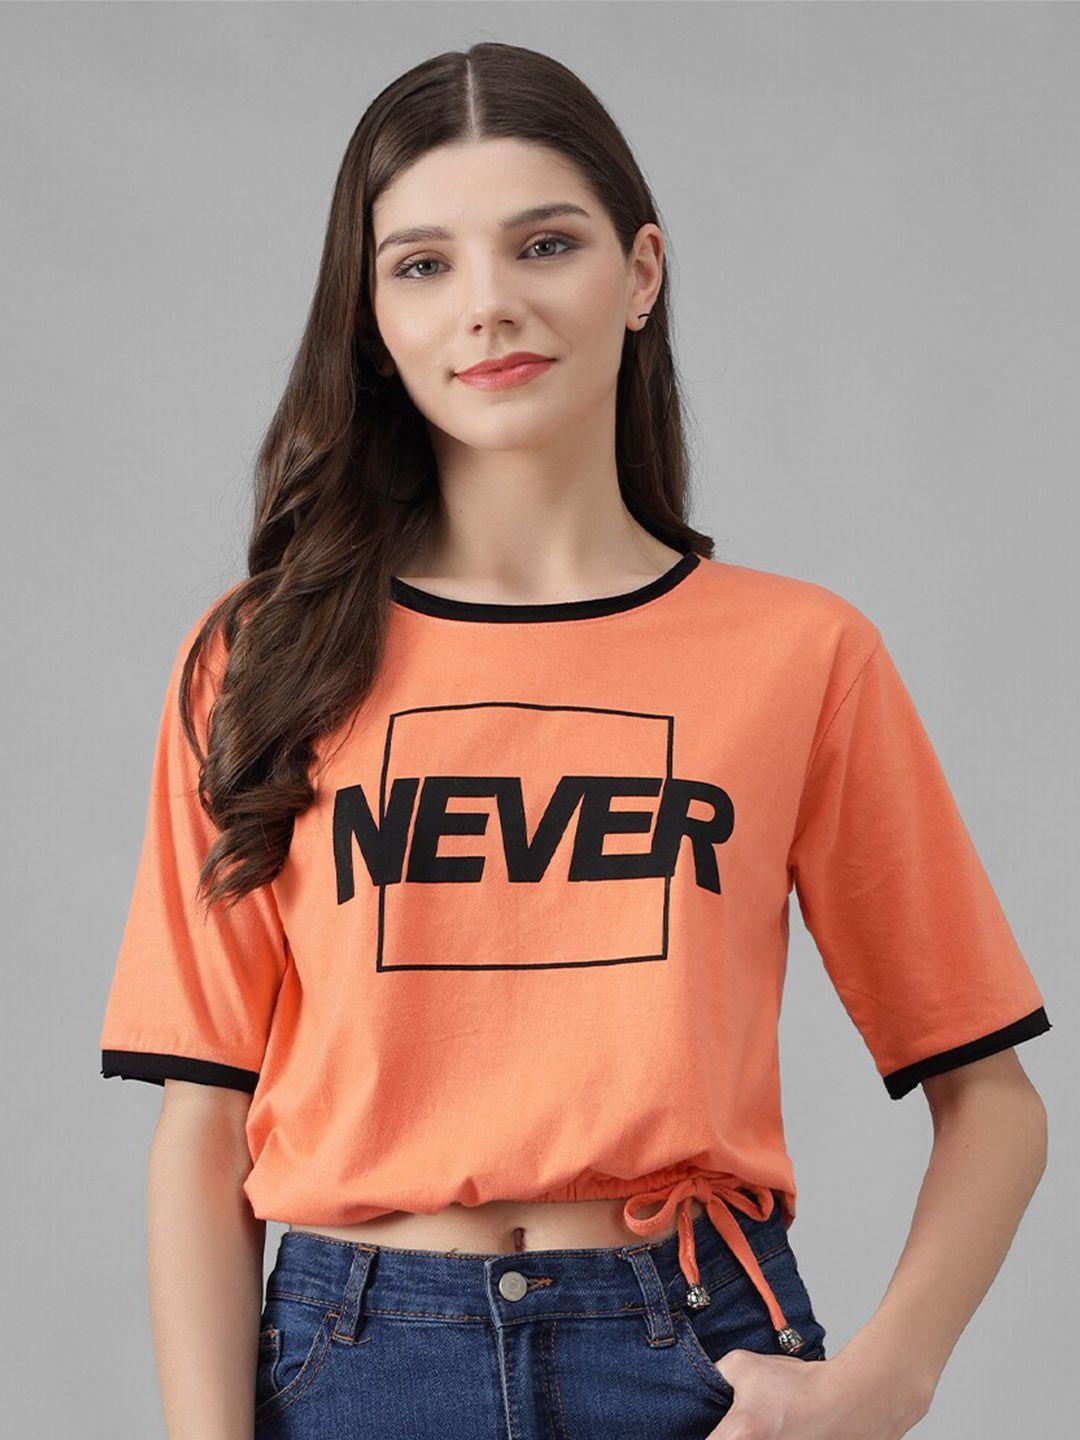 viral-trend-women-peach-coloured-typography-extended-sleeves-pure-cotton-pockets-t-shirt